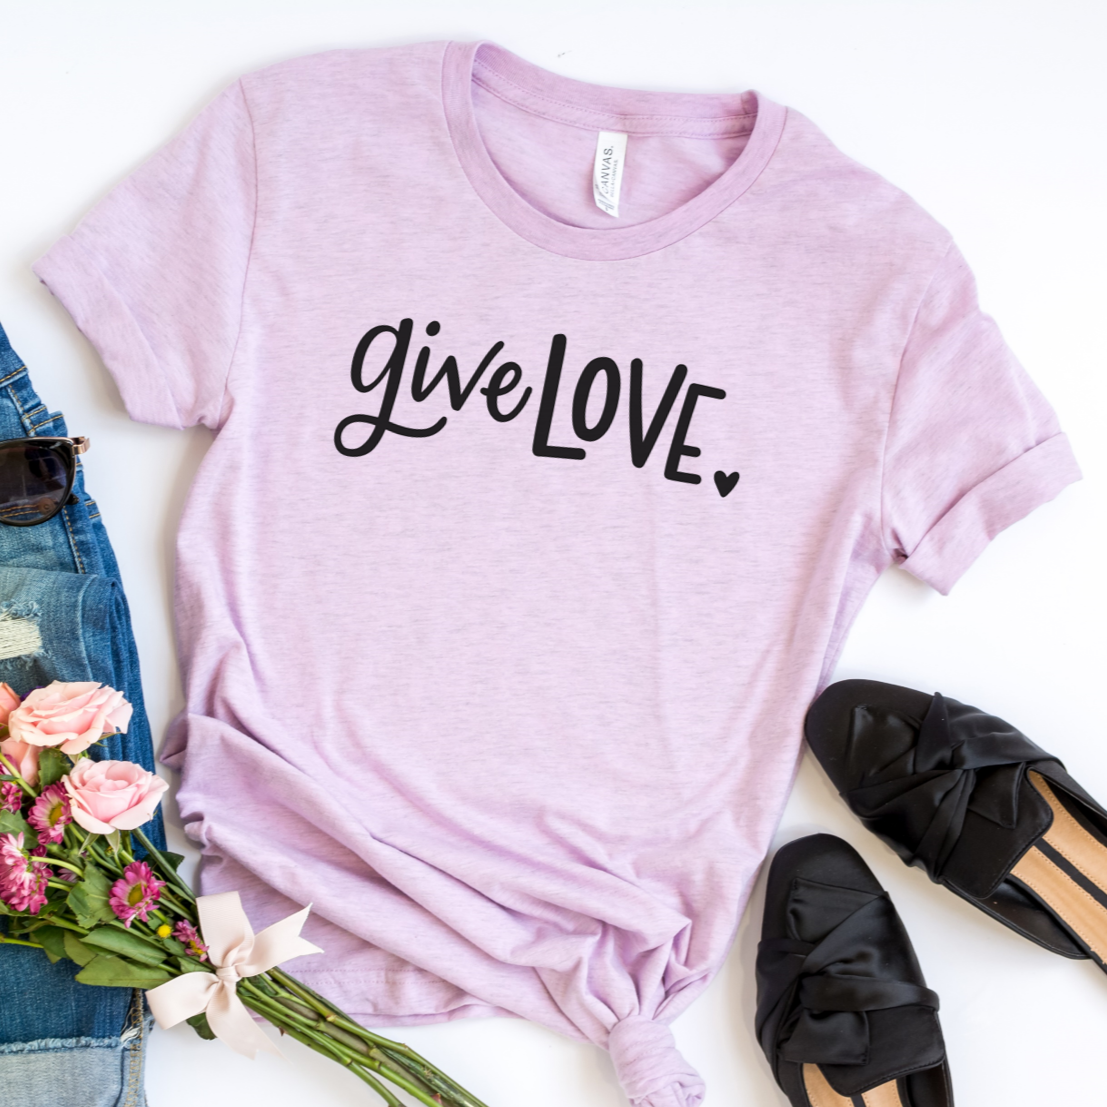 Give love in black on a heather lilac bella canvas 3001cvc t-shirt.